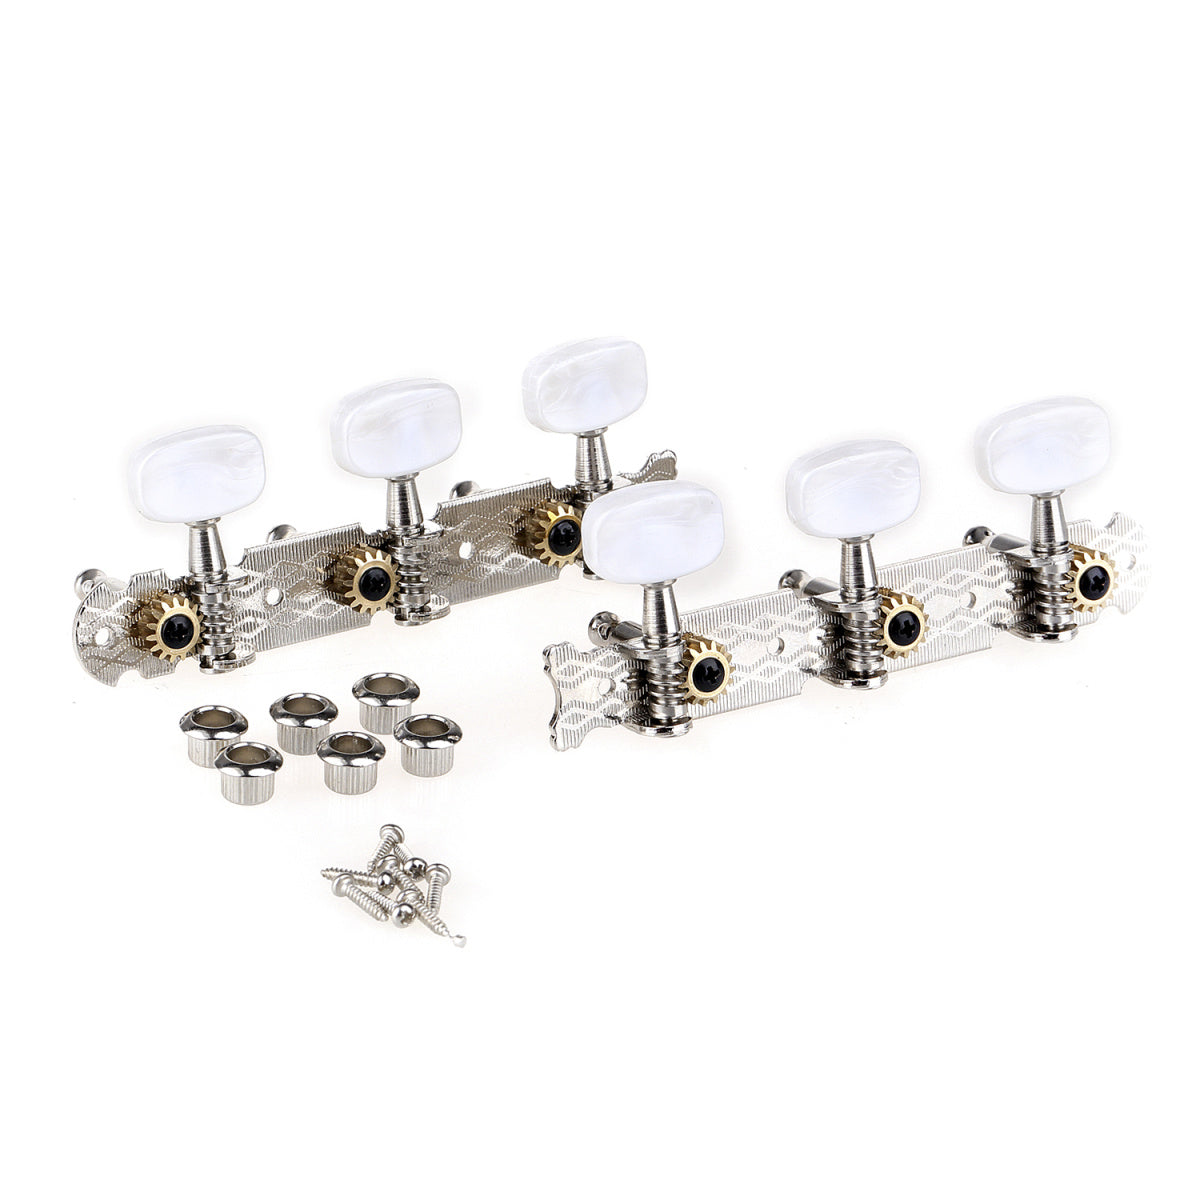 Musiclily Pro 3 on a Plate Acoustic Guitar Tuners Machine Heads Tuning Keys Pegs Set, Nickel with White Button